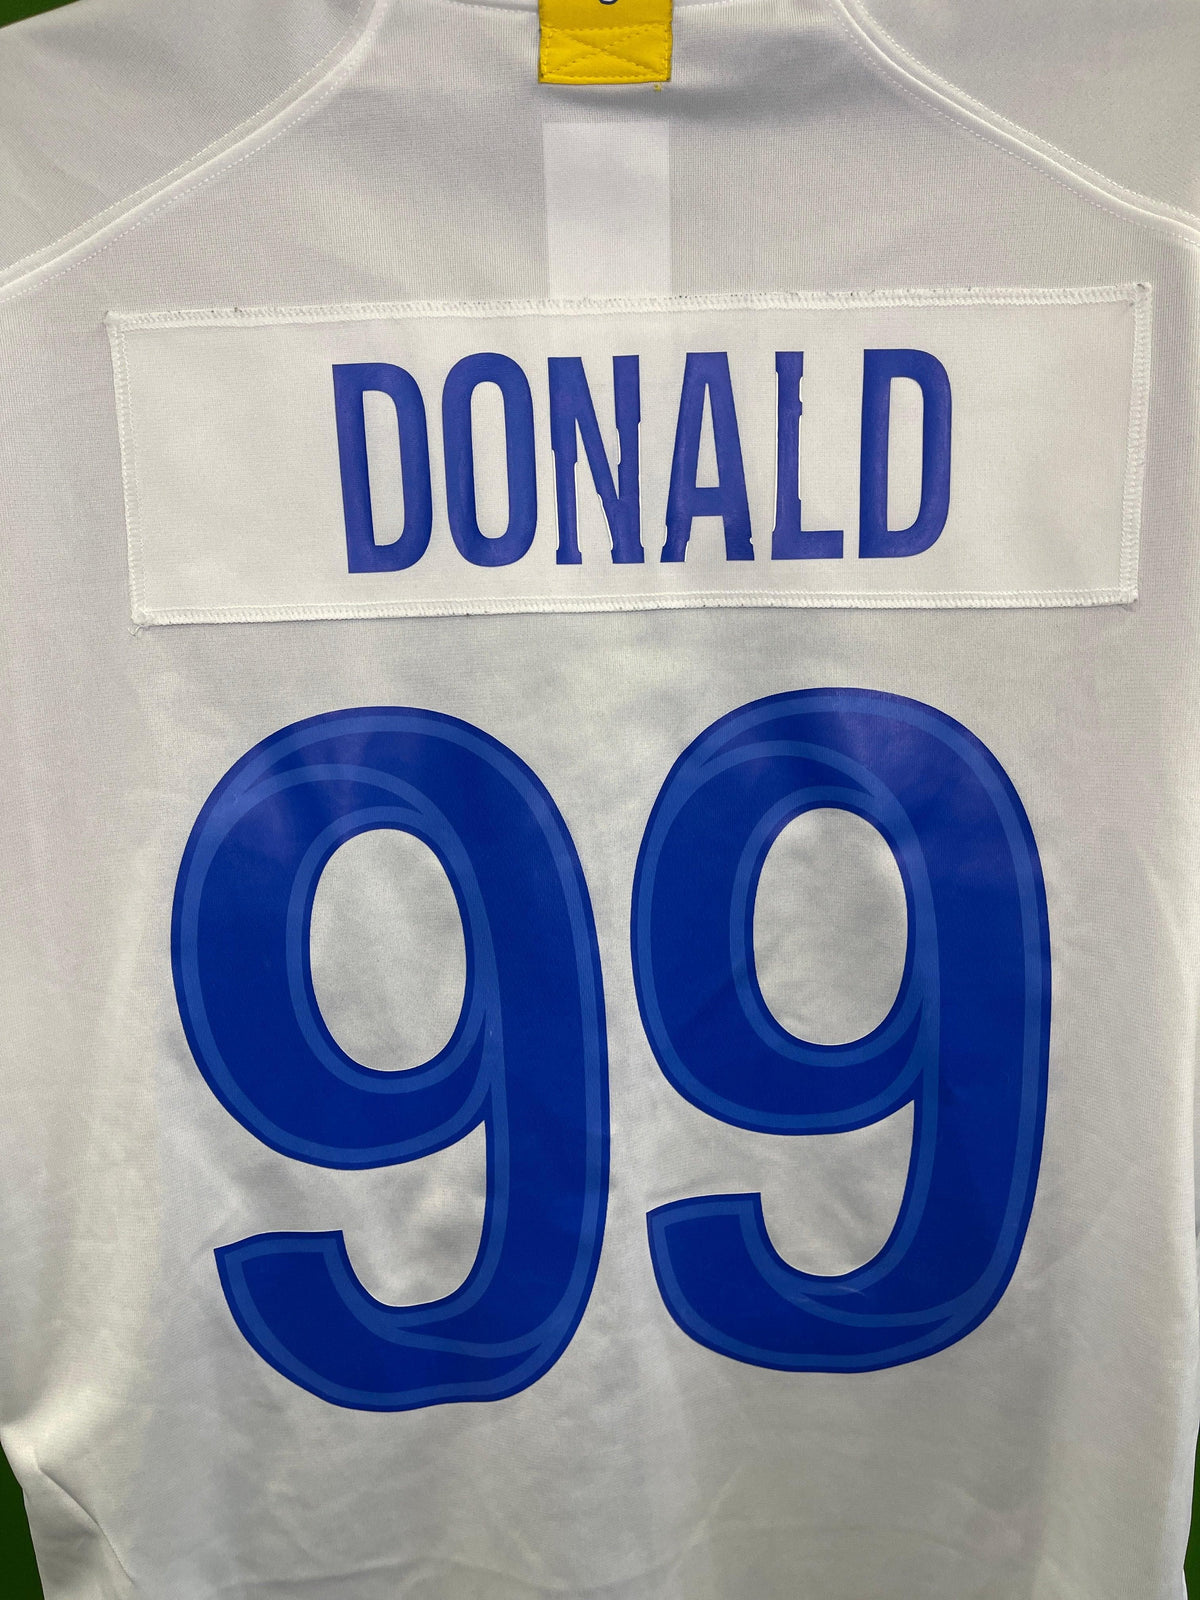 NFL Los Angeles Rams Aaron Donald #99 Game Jersey Men's Large NWT